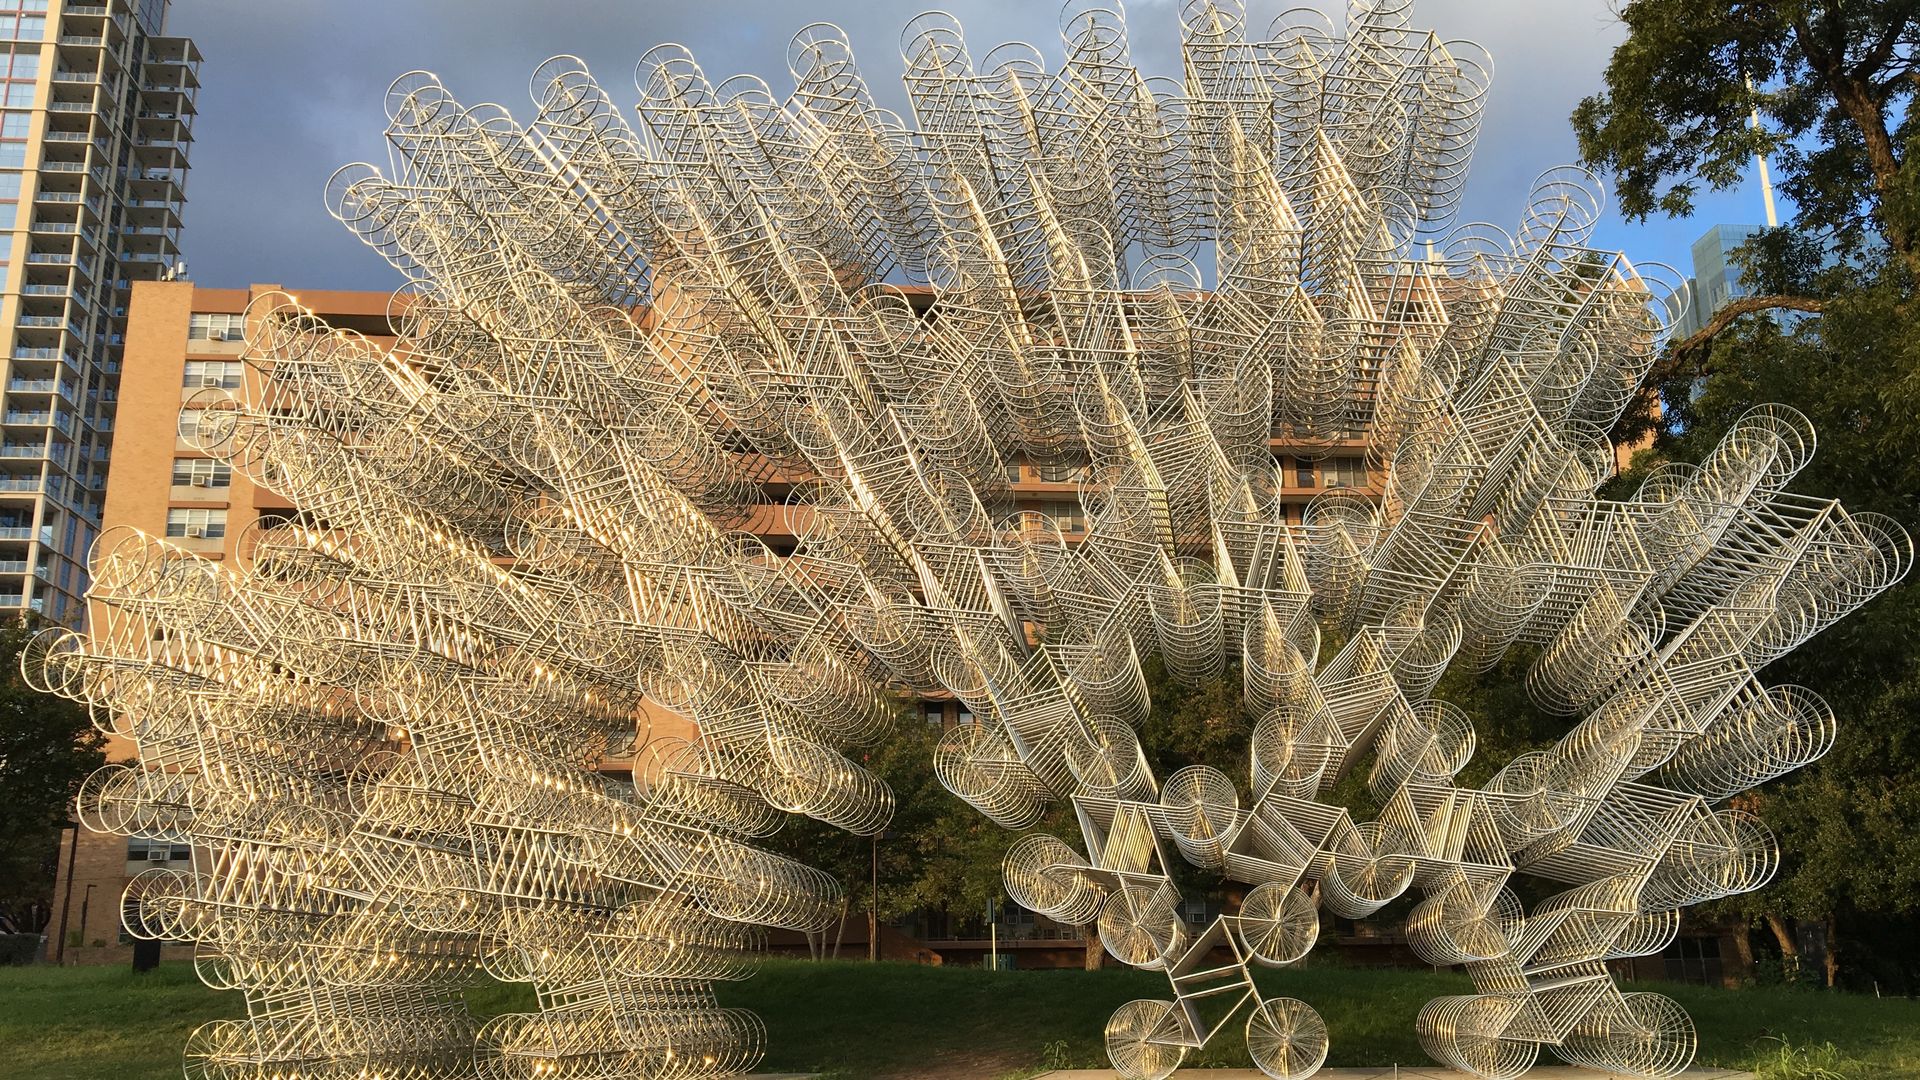 A photo of Forever Bicycles, a sculpture by Ai Weiwei, 2014